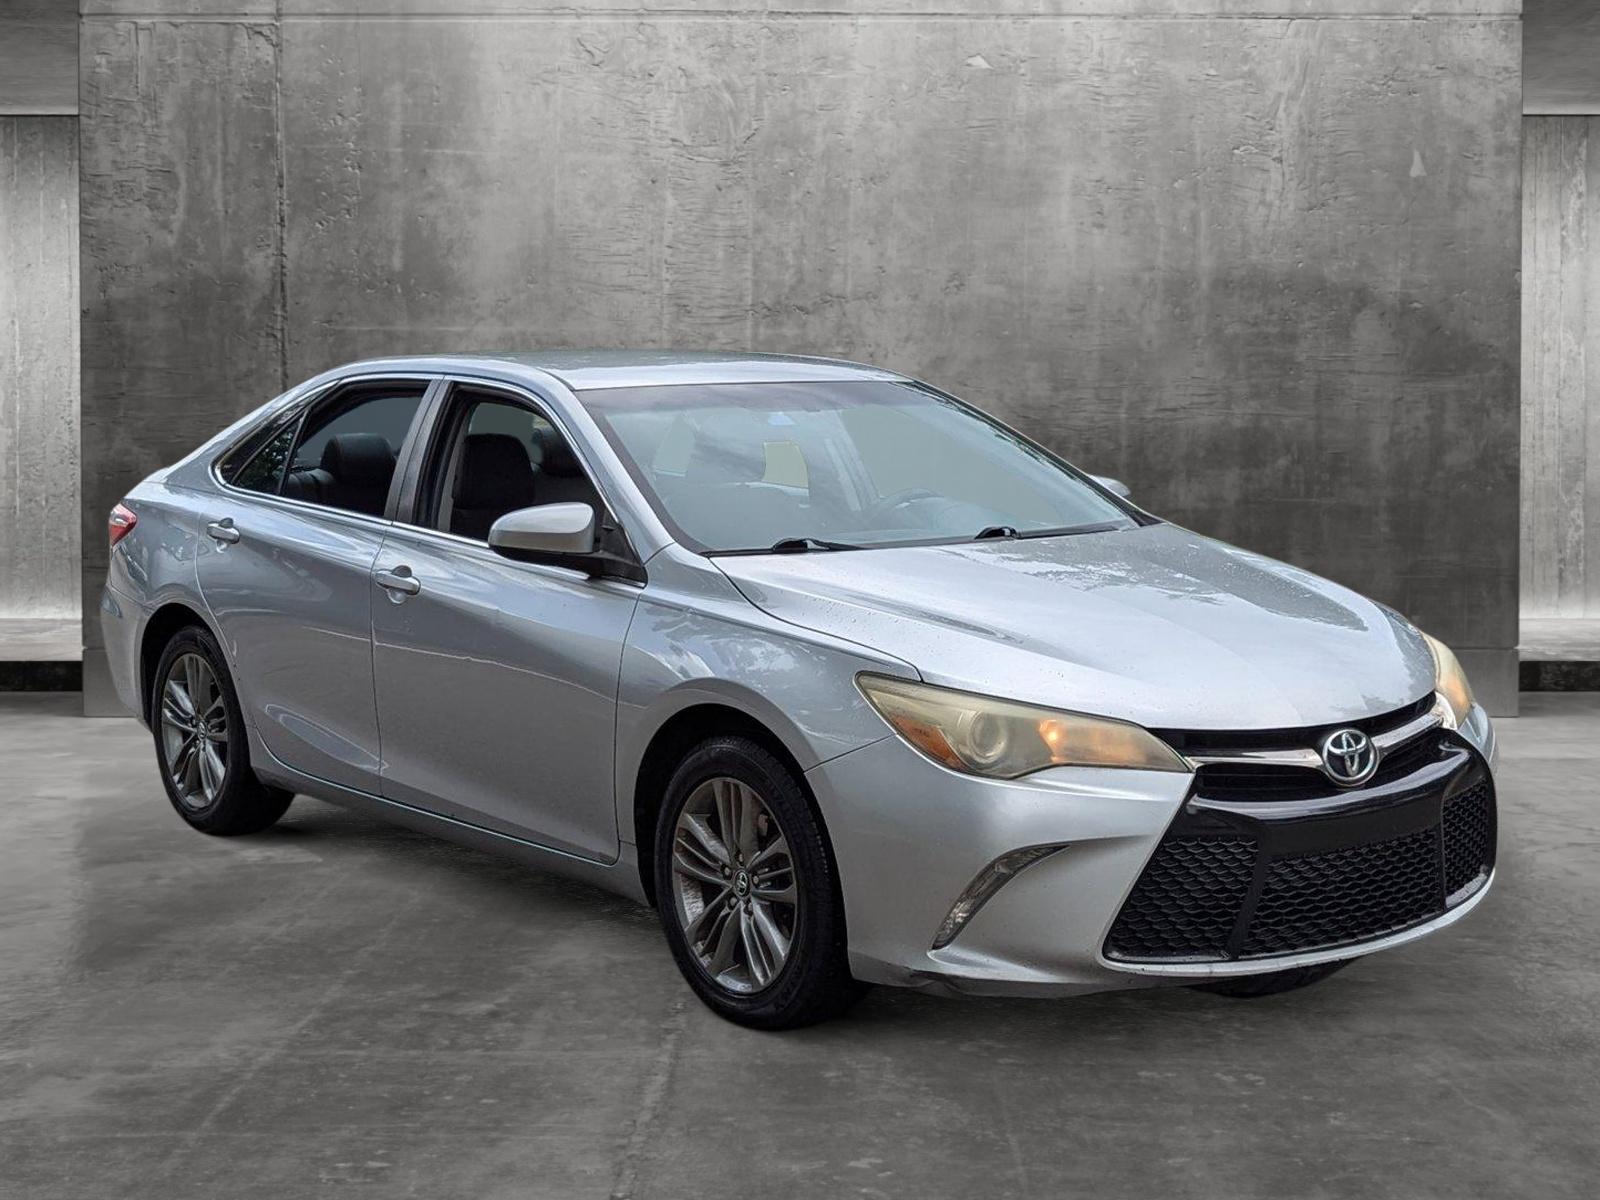 2015 Toyota Camry Vehicle Photo in West Palm Beach, FL 33417